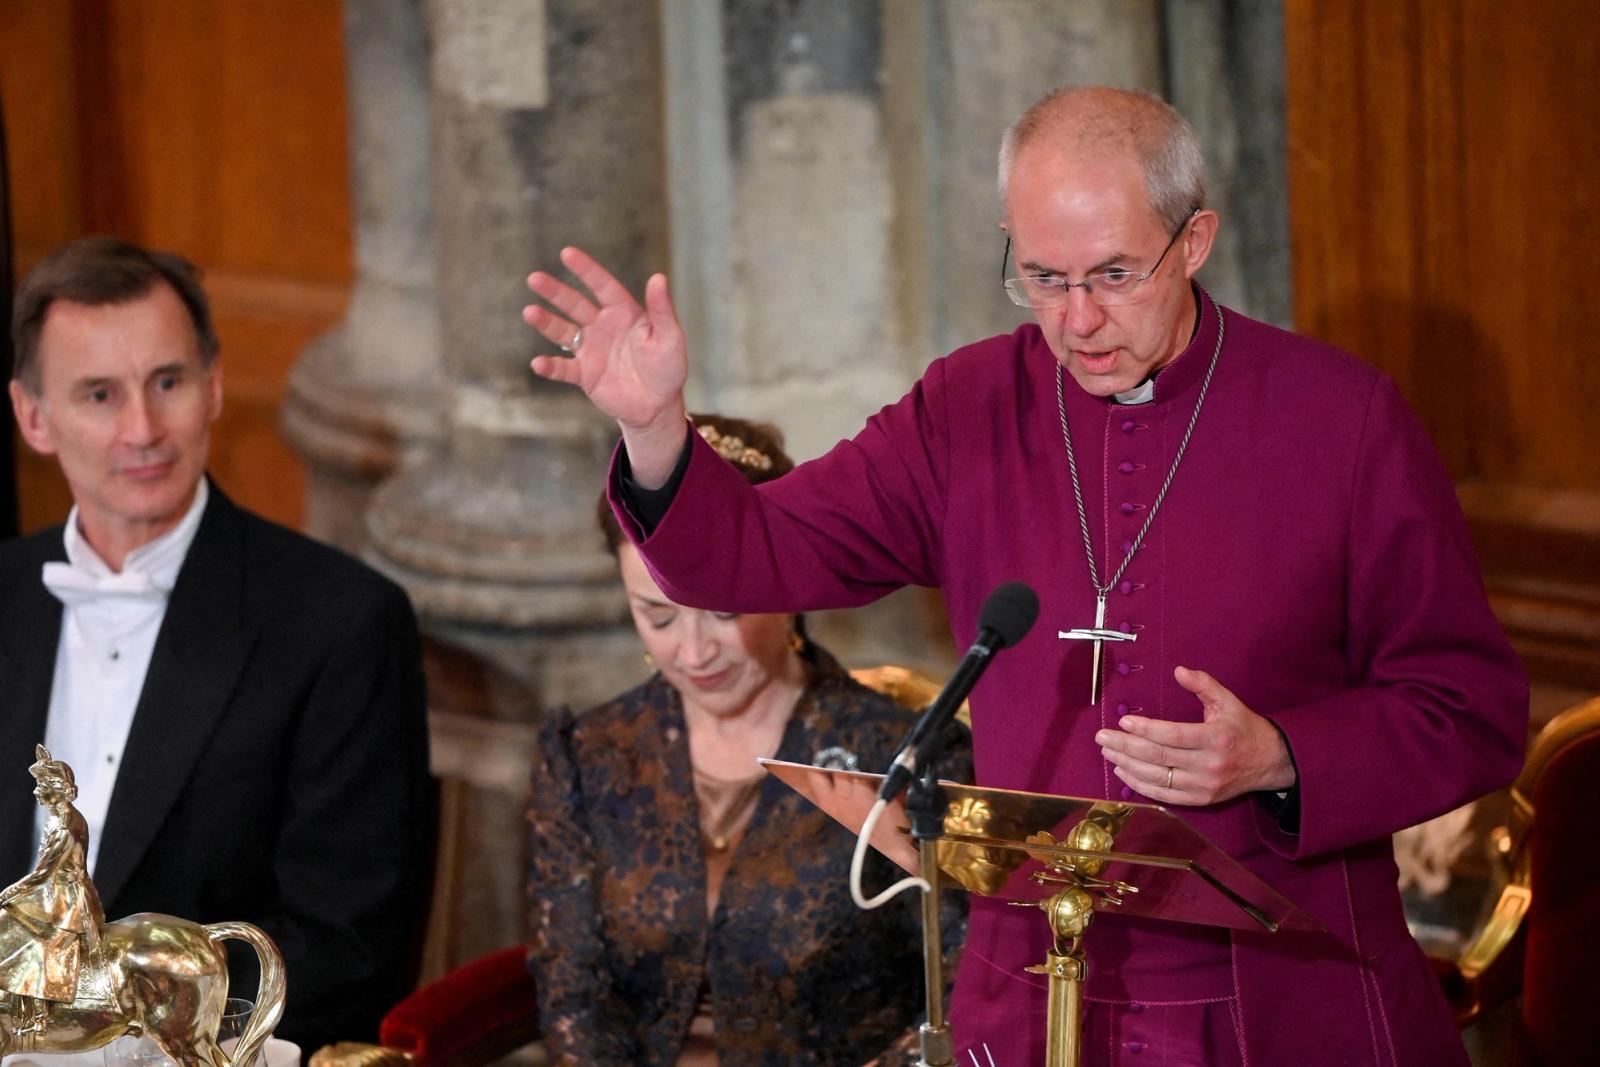 Archbishop of Canterbury Justin Welby delivers a speech during the annual Lord Mayor's Banquet at Guildhall, in London.